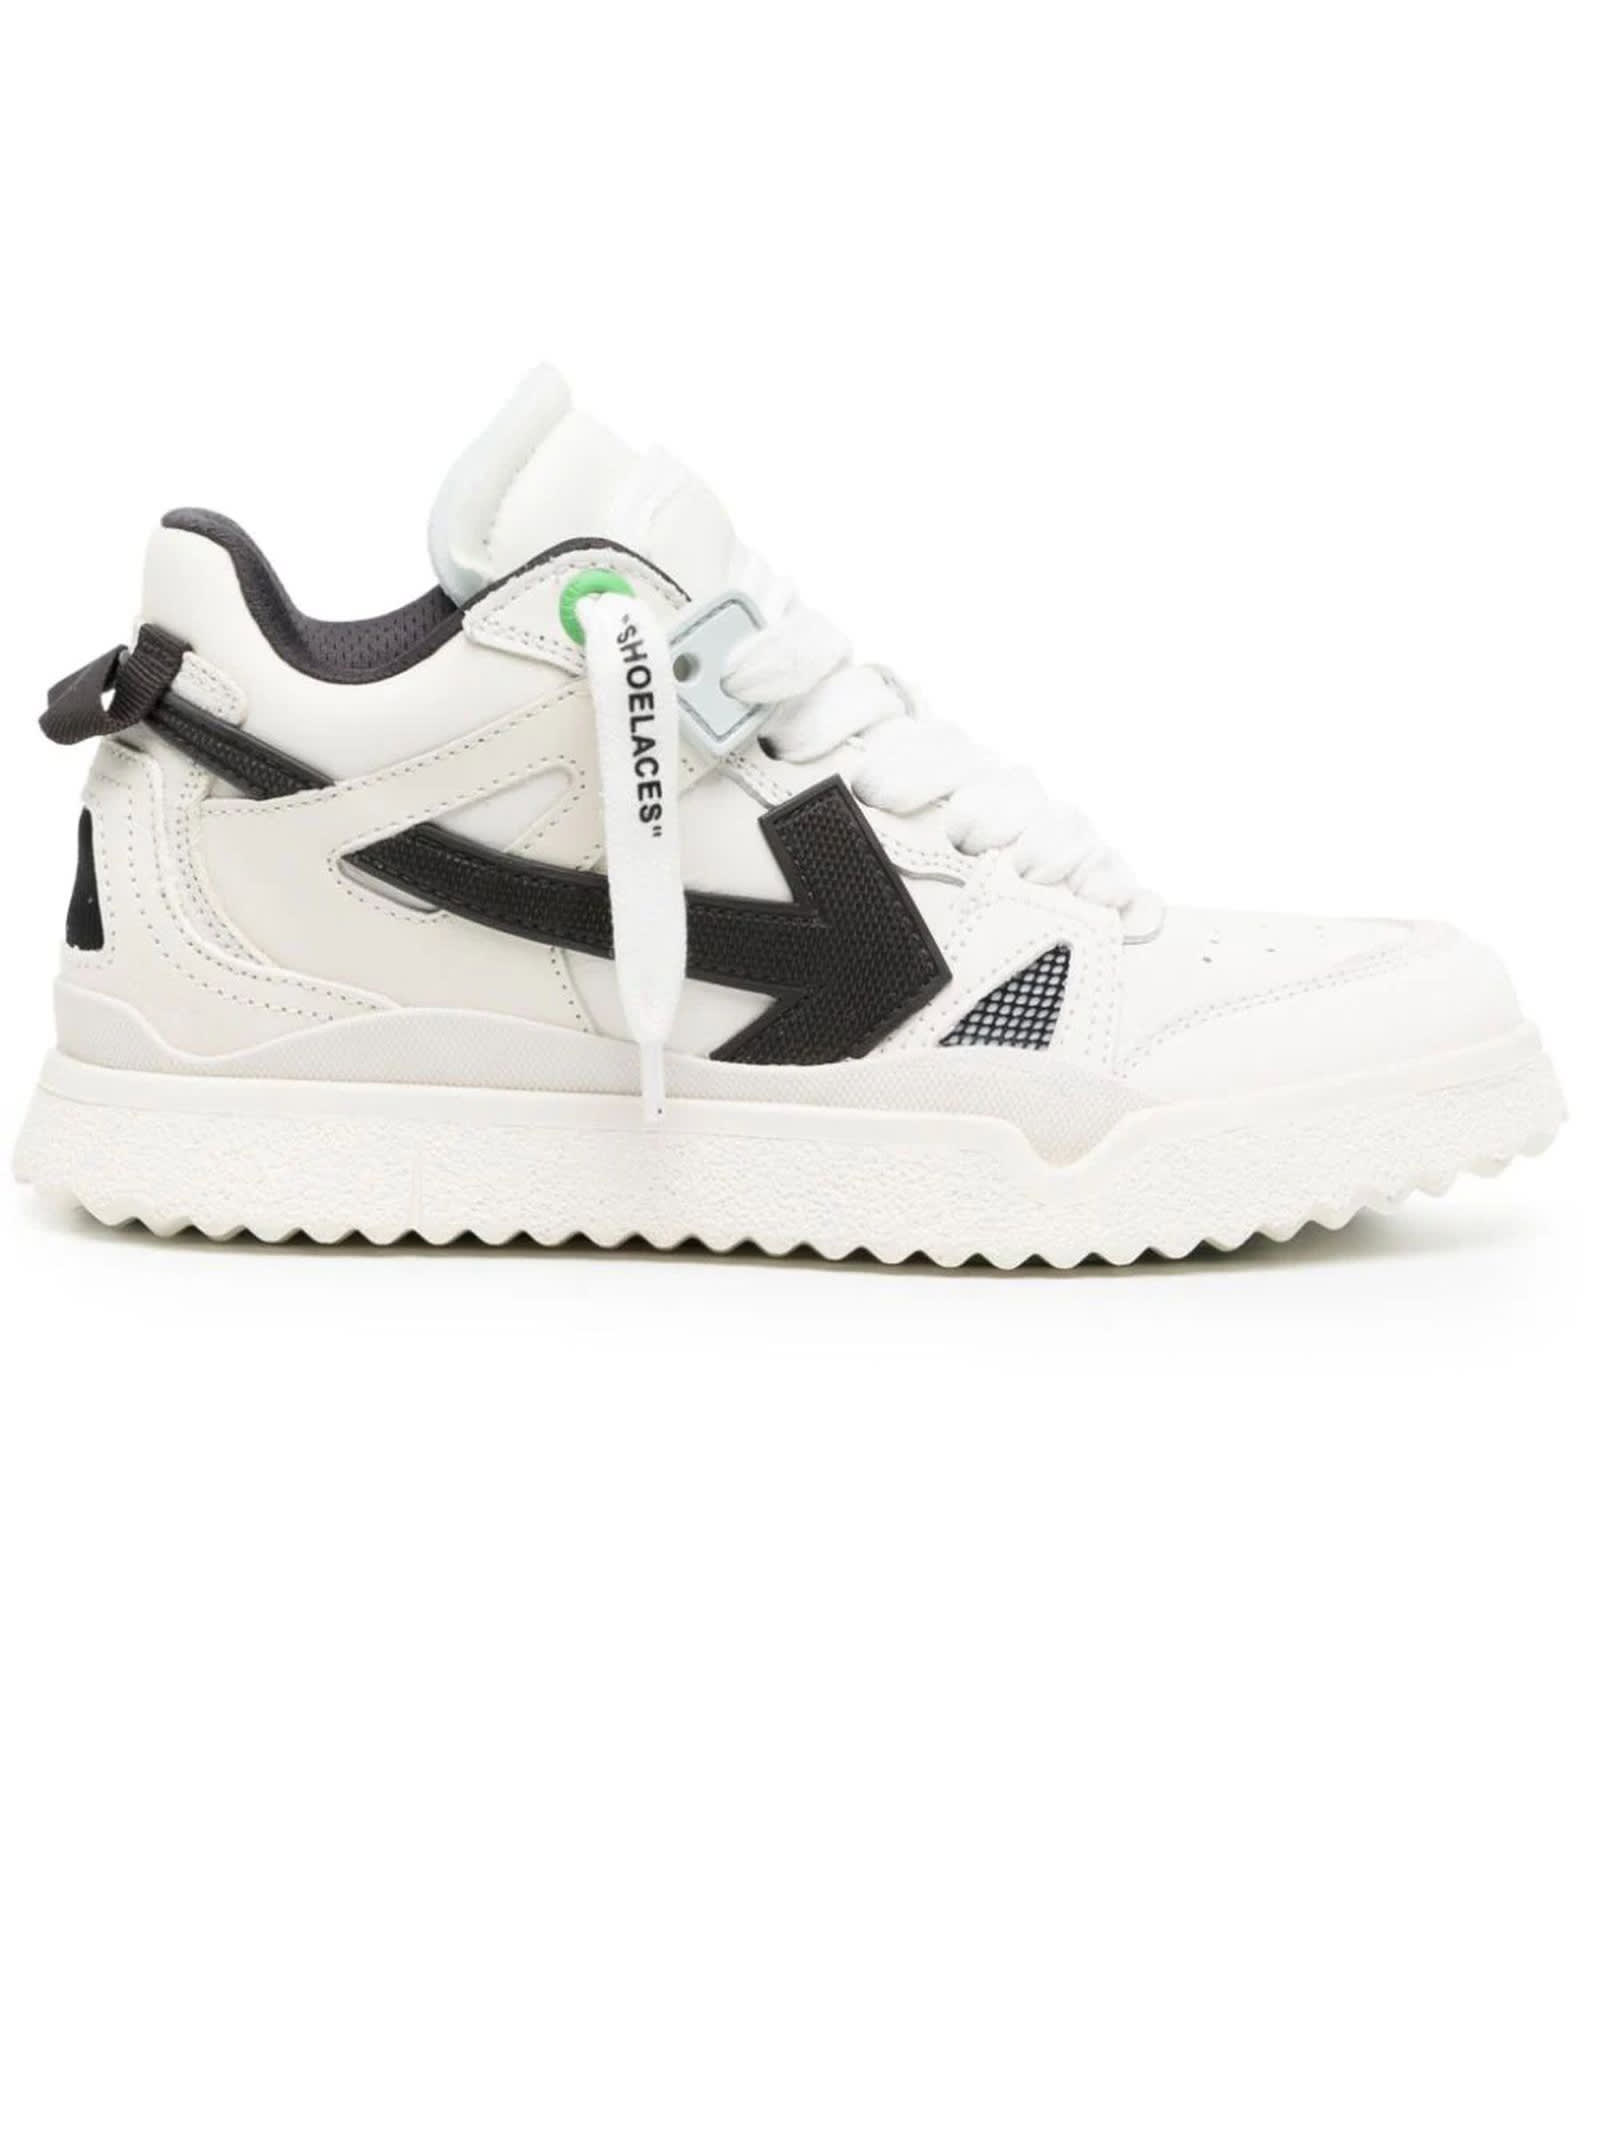 OFF-WHITE SPONGE WHITE LEATHER SNEAKERS